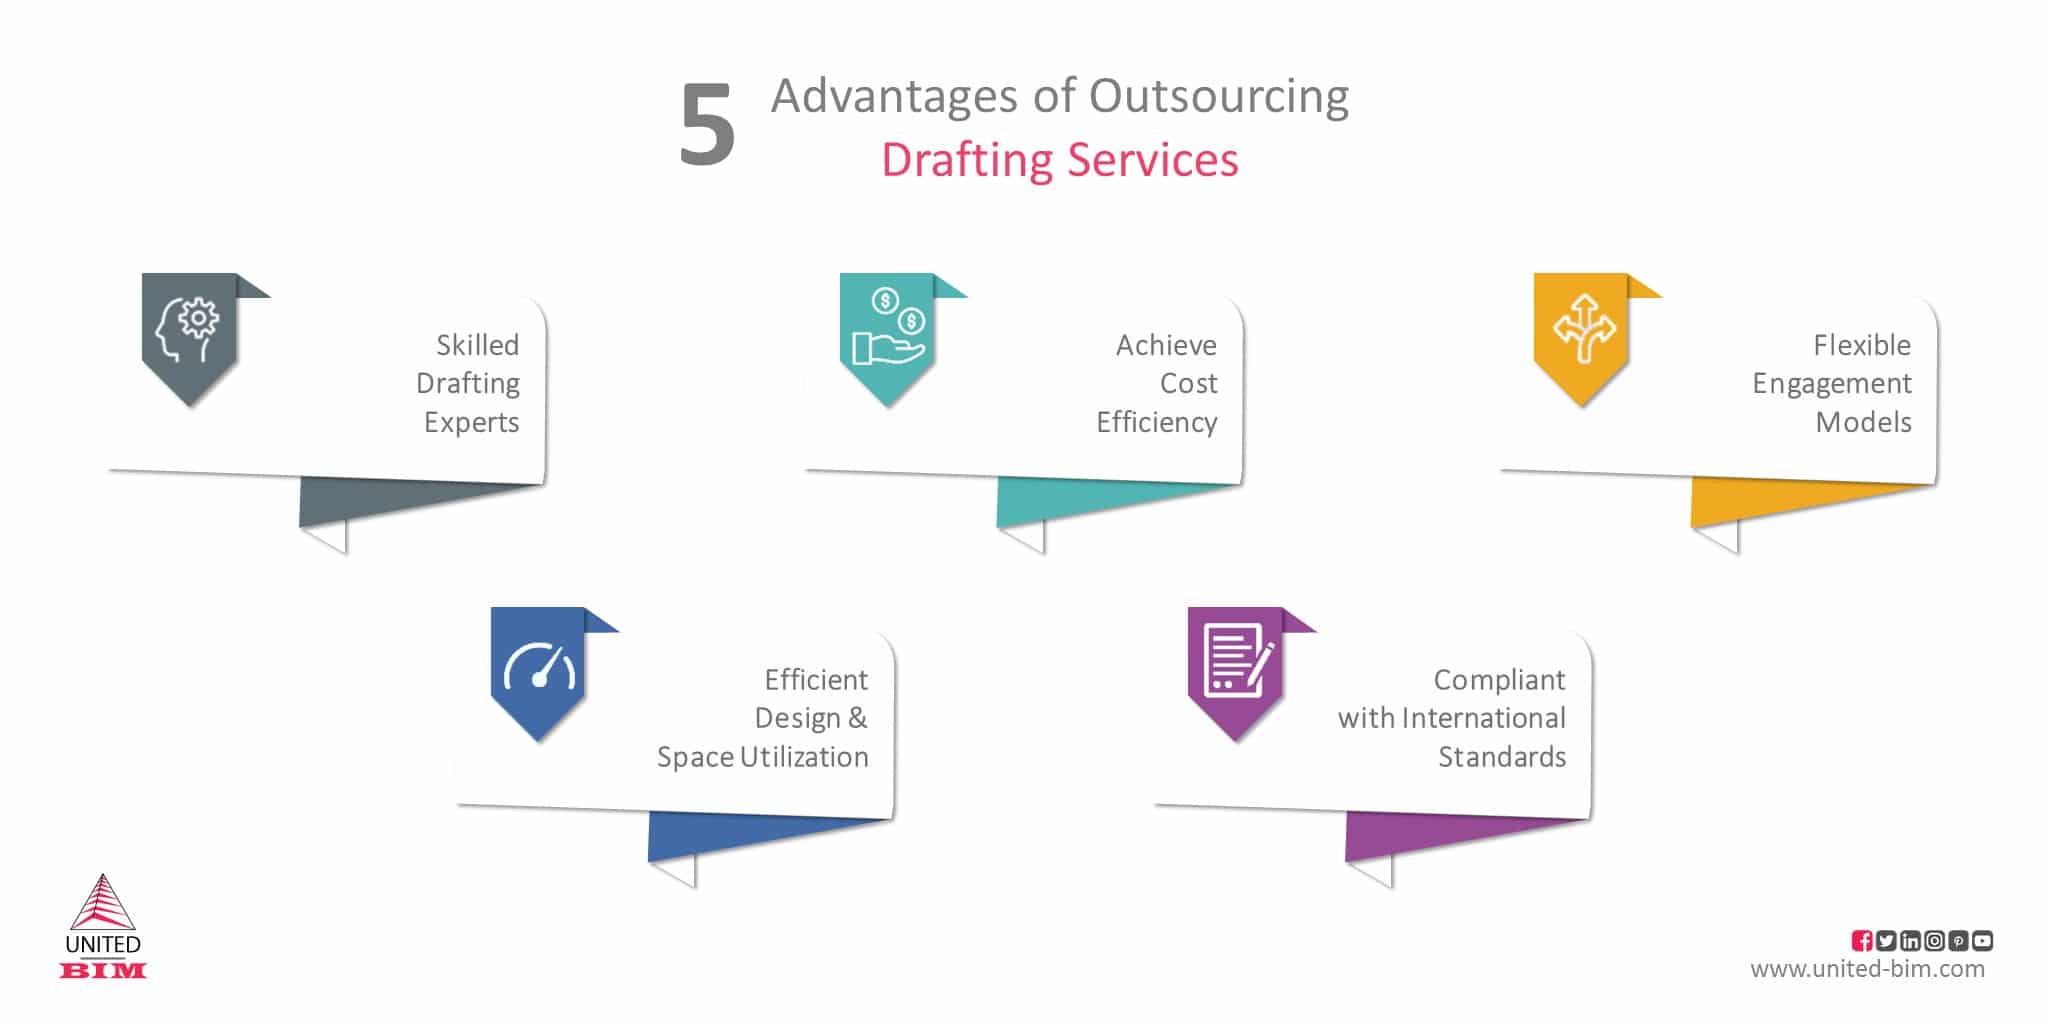 5 Advantages of Architectural Drafting Services Outsourcing